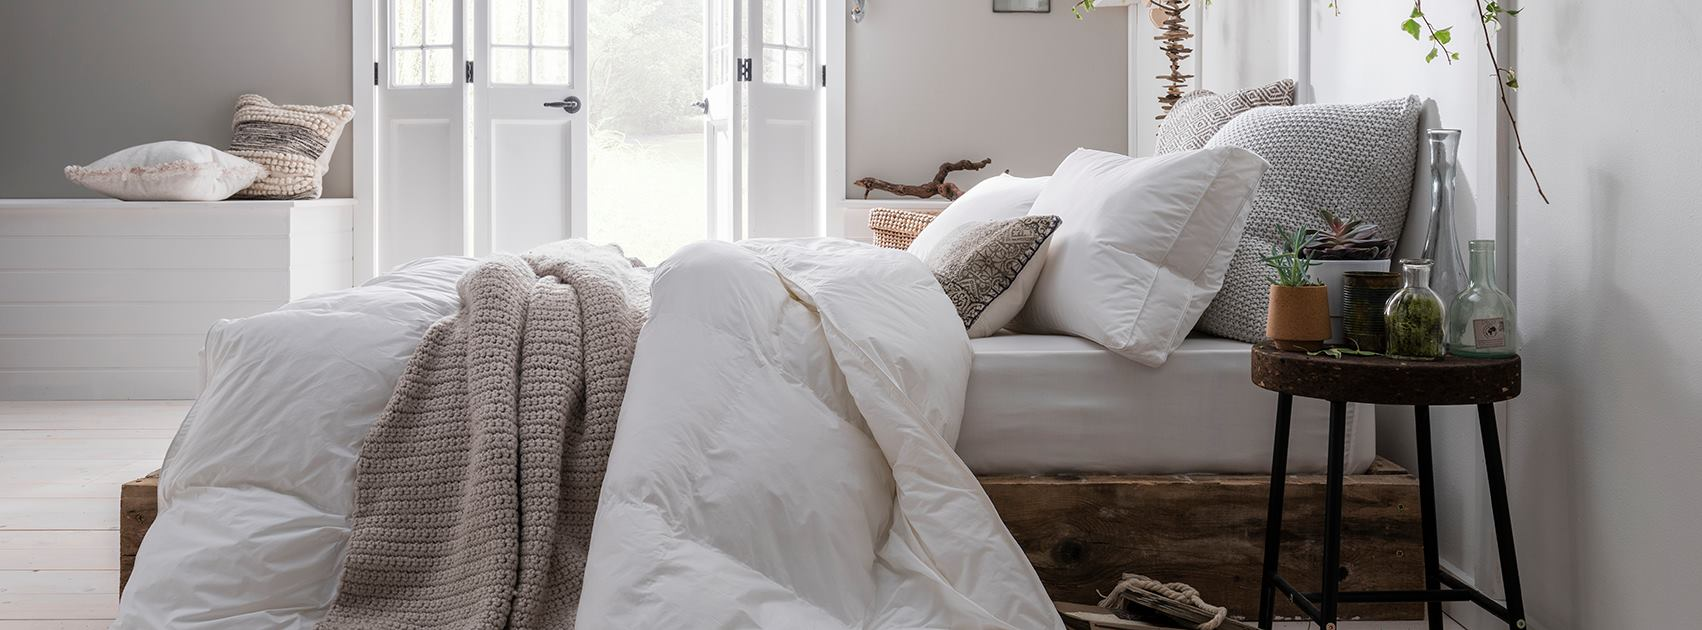 Access exclusive deals, coupons, offers and cashback on The Fine Bedding Company: Sleep in Luxury and Comfort through OODLZ courtesy of The Fine Bedding Company.